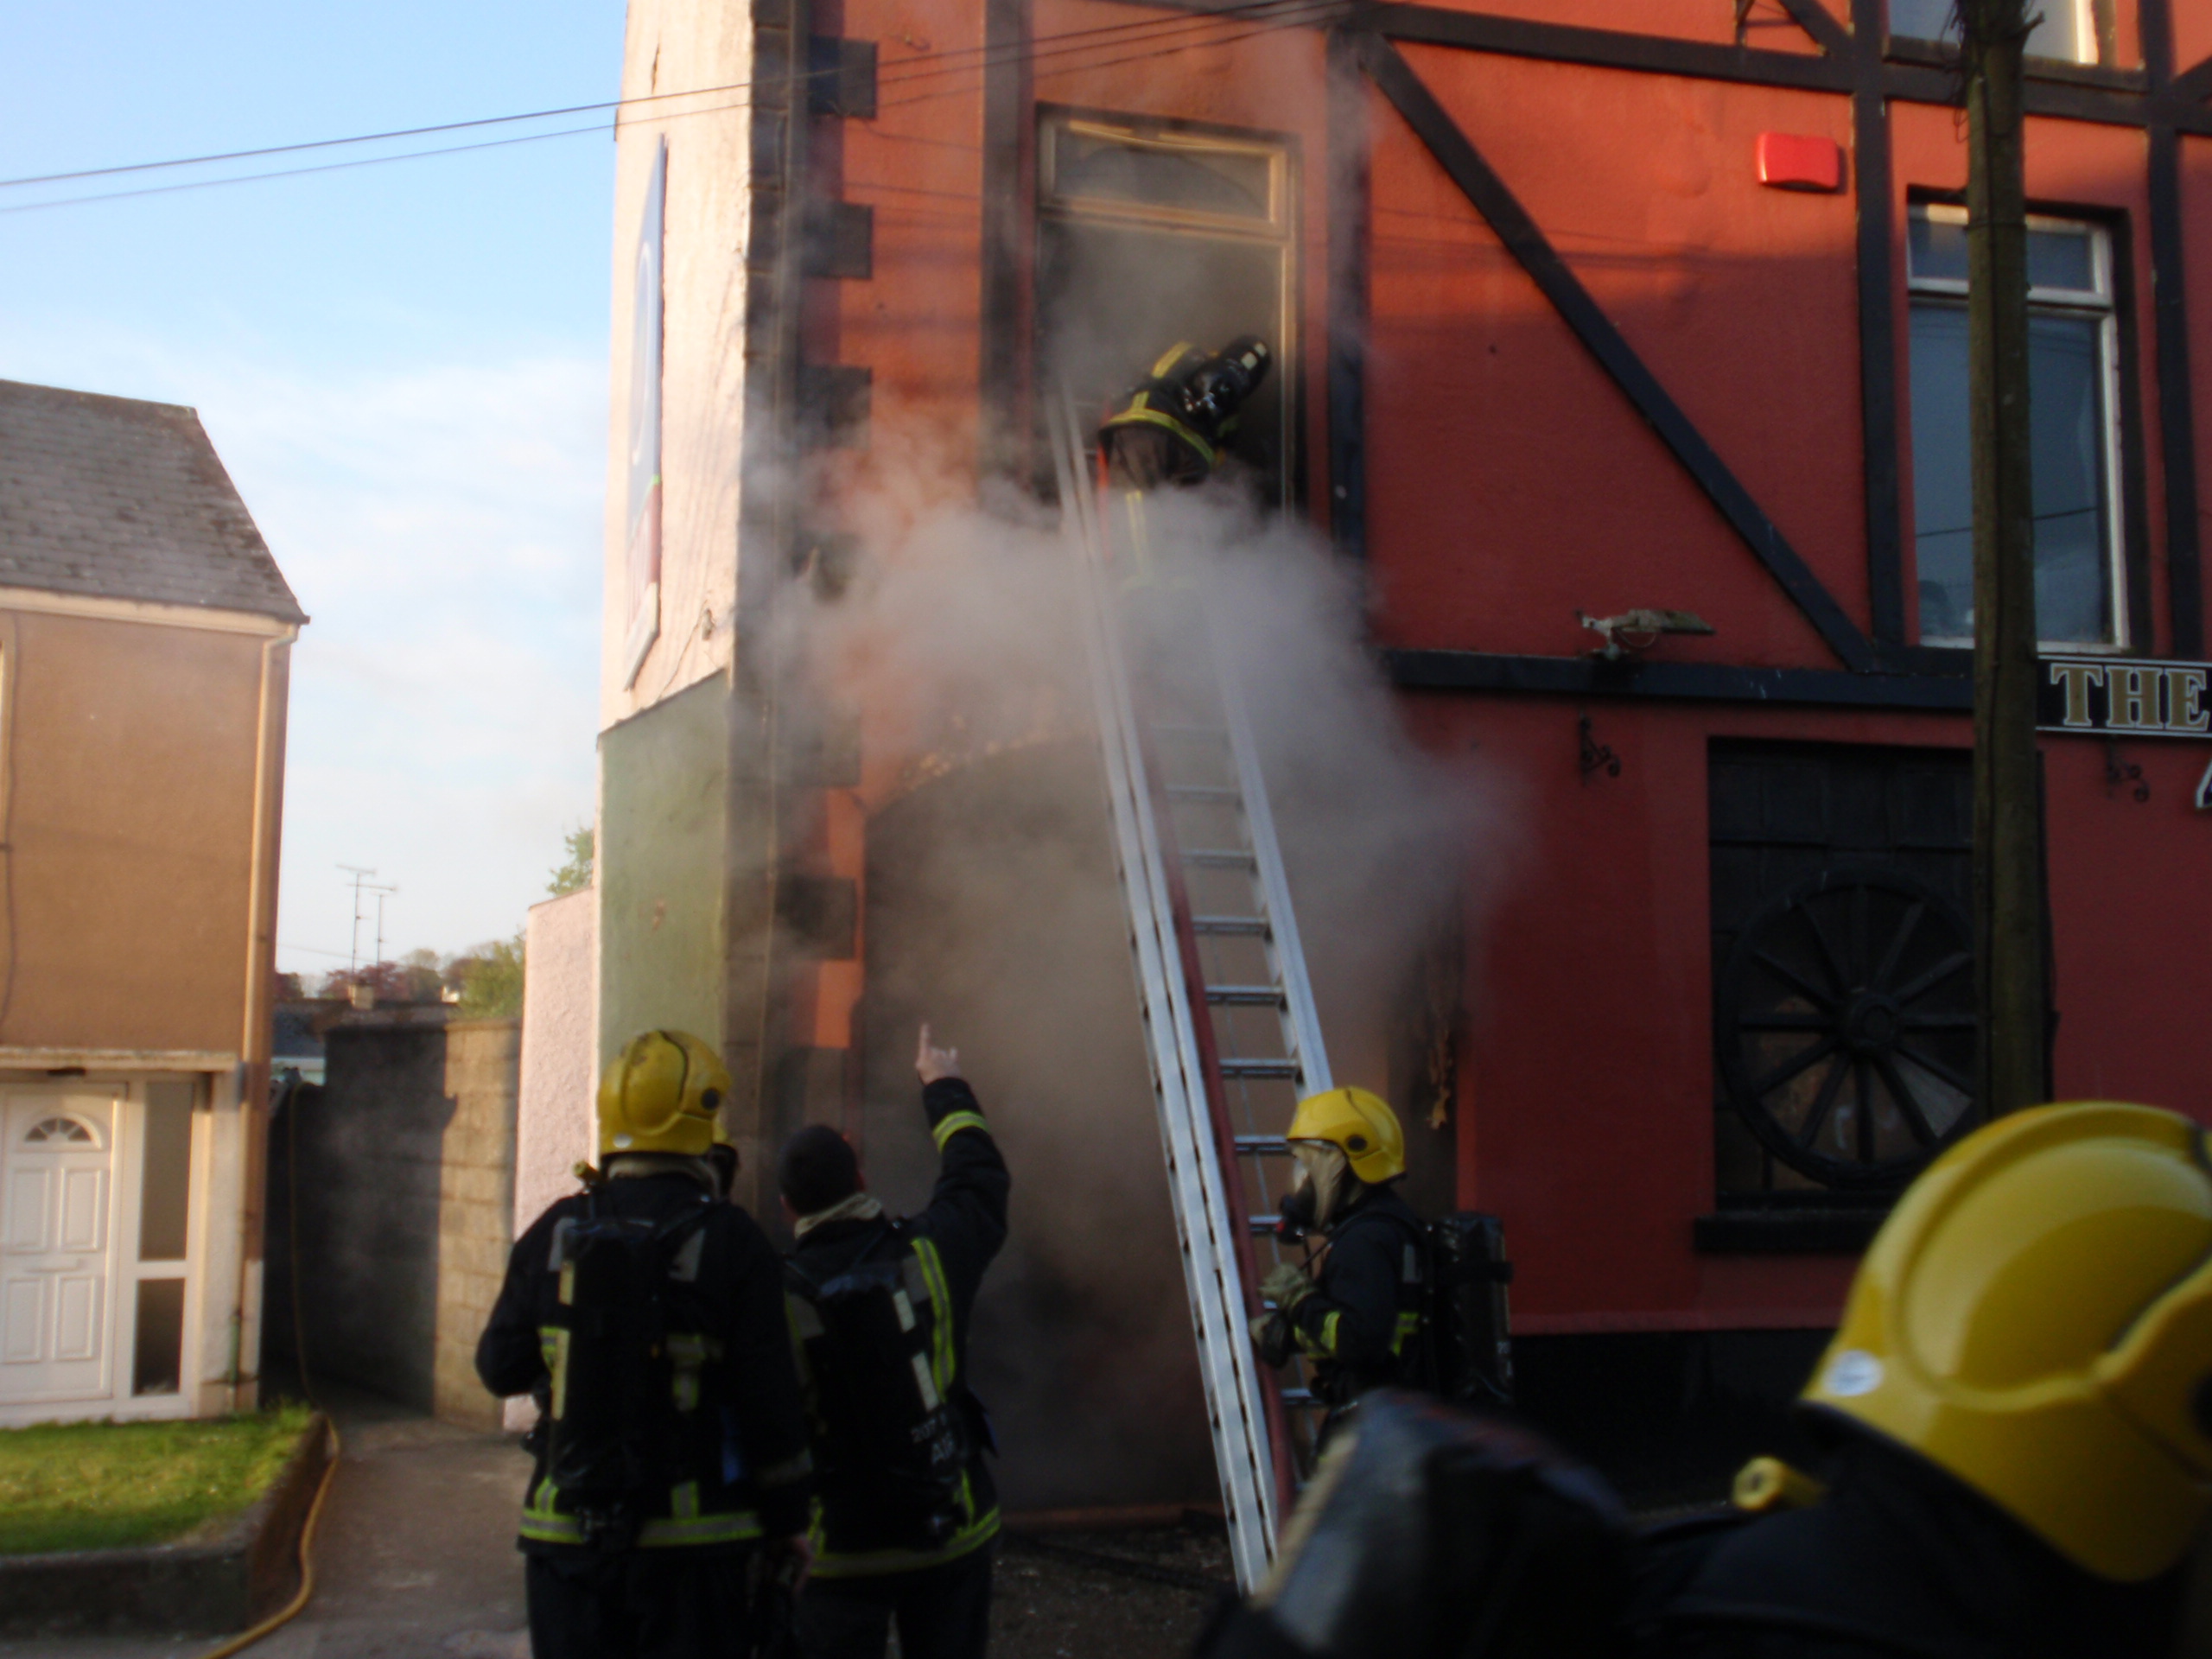 Incidents attended by Monaghan Fire Authority